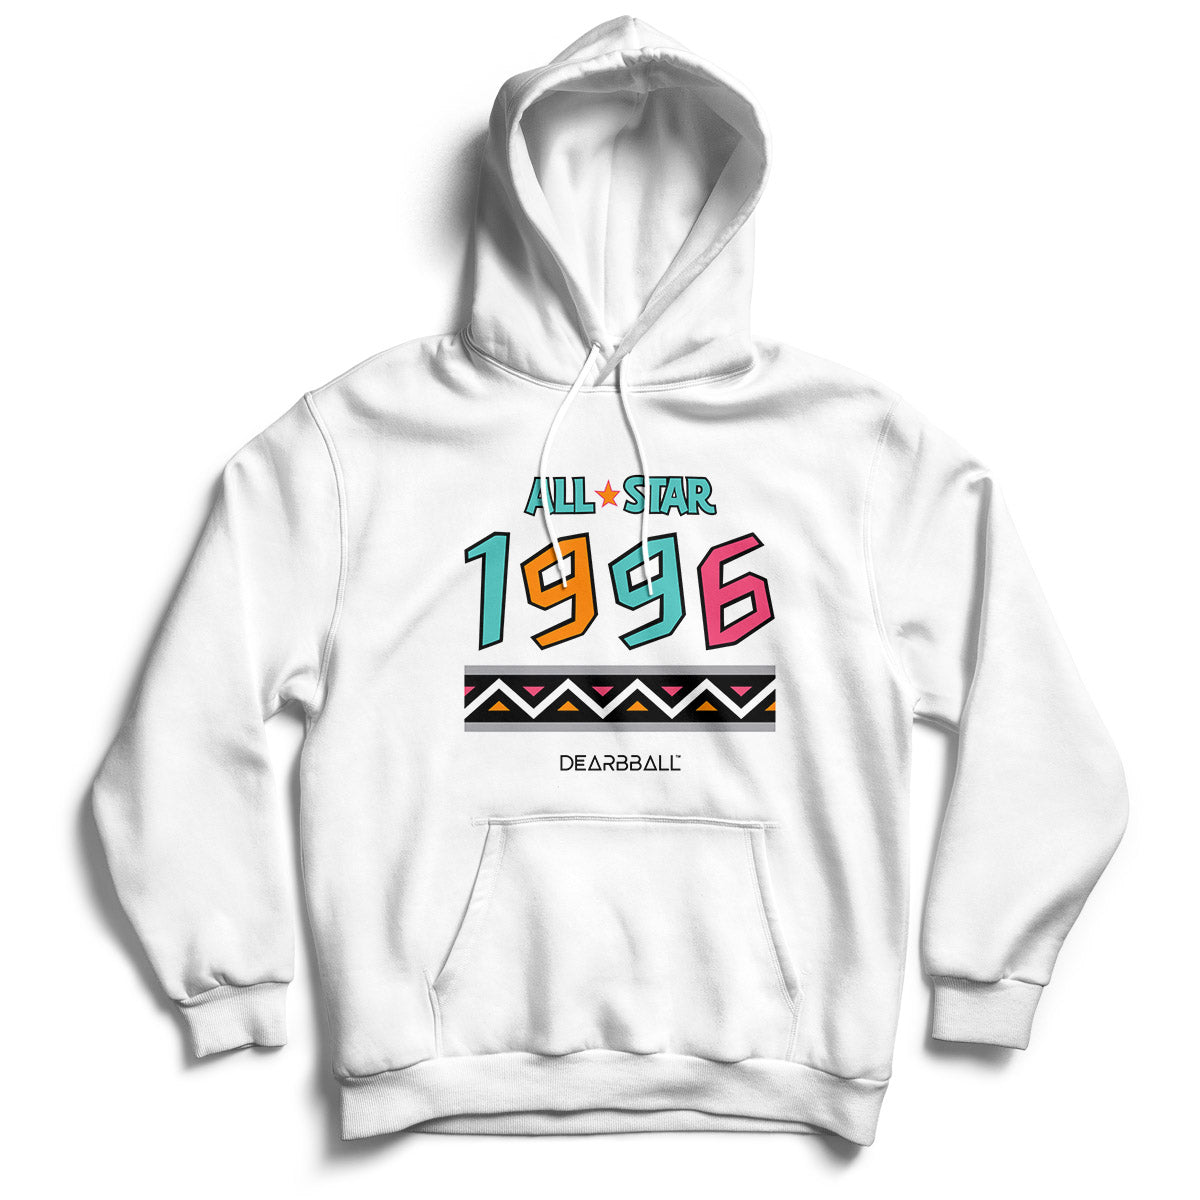 DearBBall Hoodie - ALL STAR 1996 Limited Edition